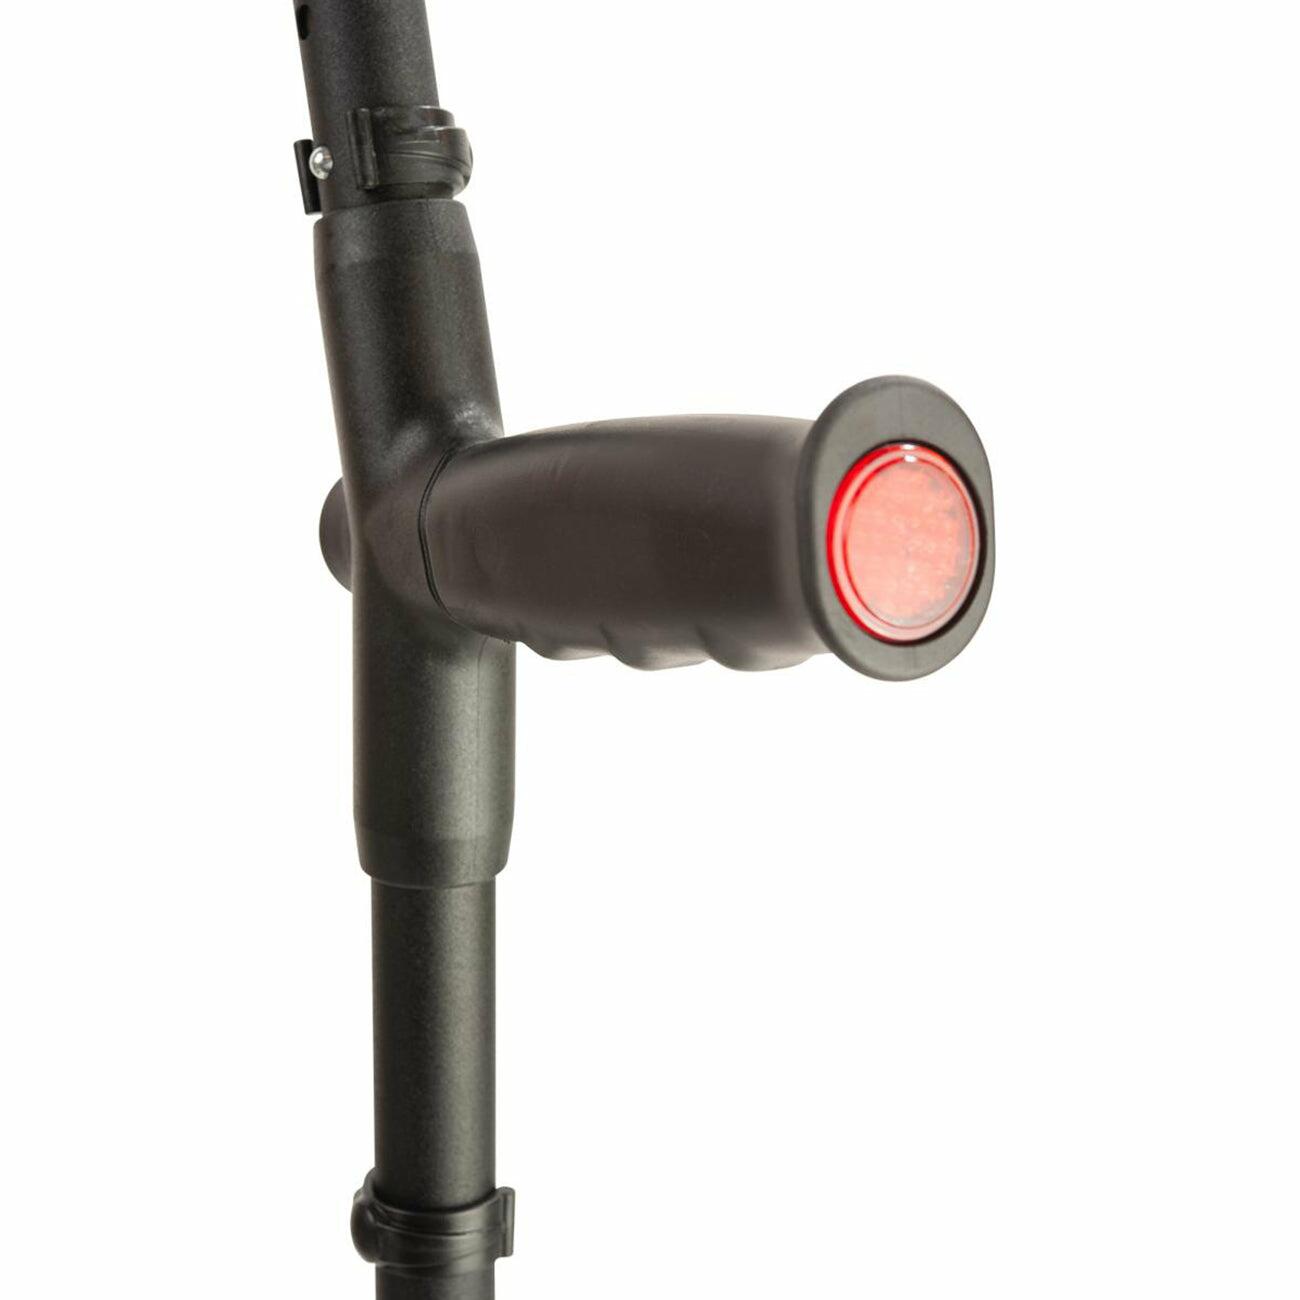 Soft grip handle of the Flexyfoot Soft Grip Double Adjustable Crutch